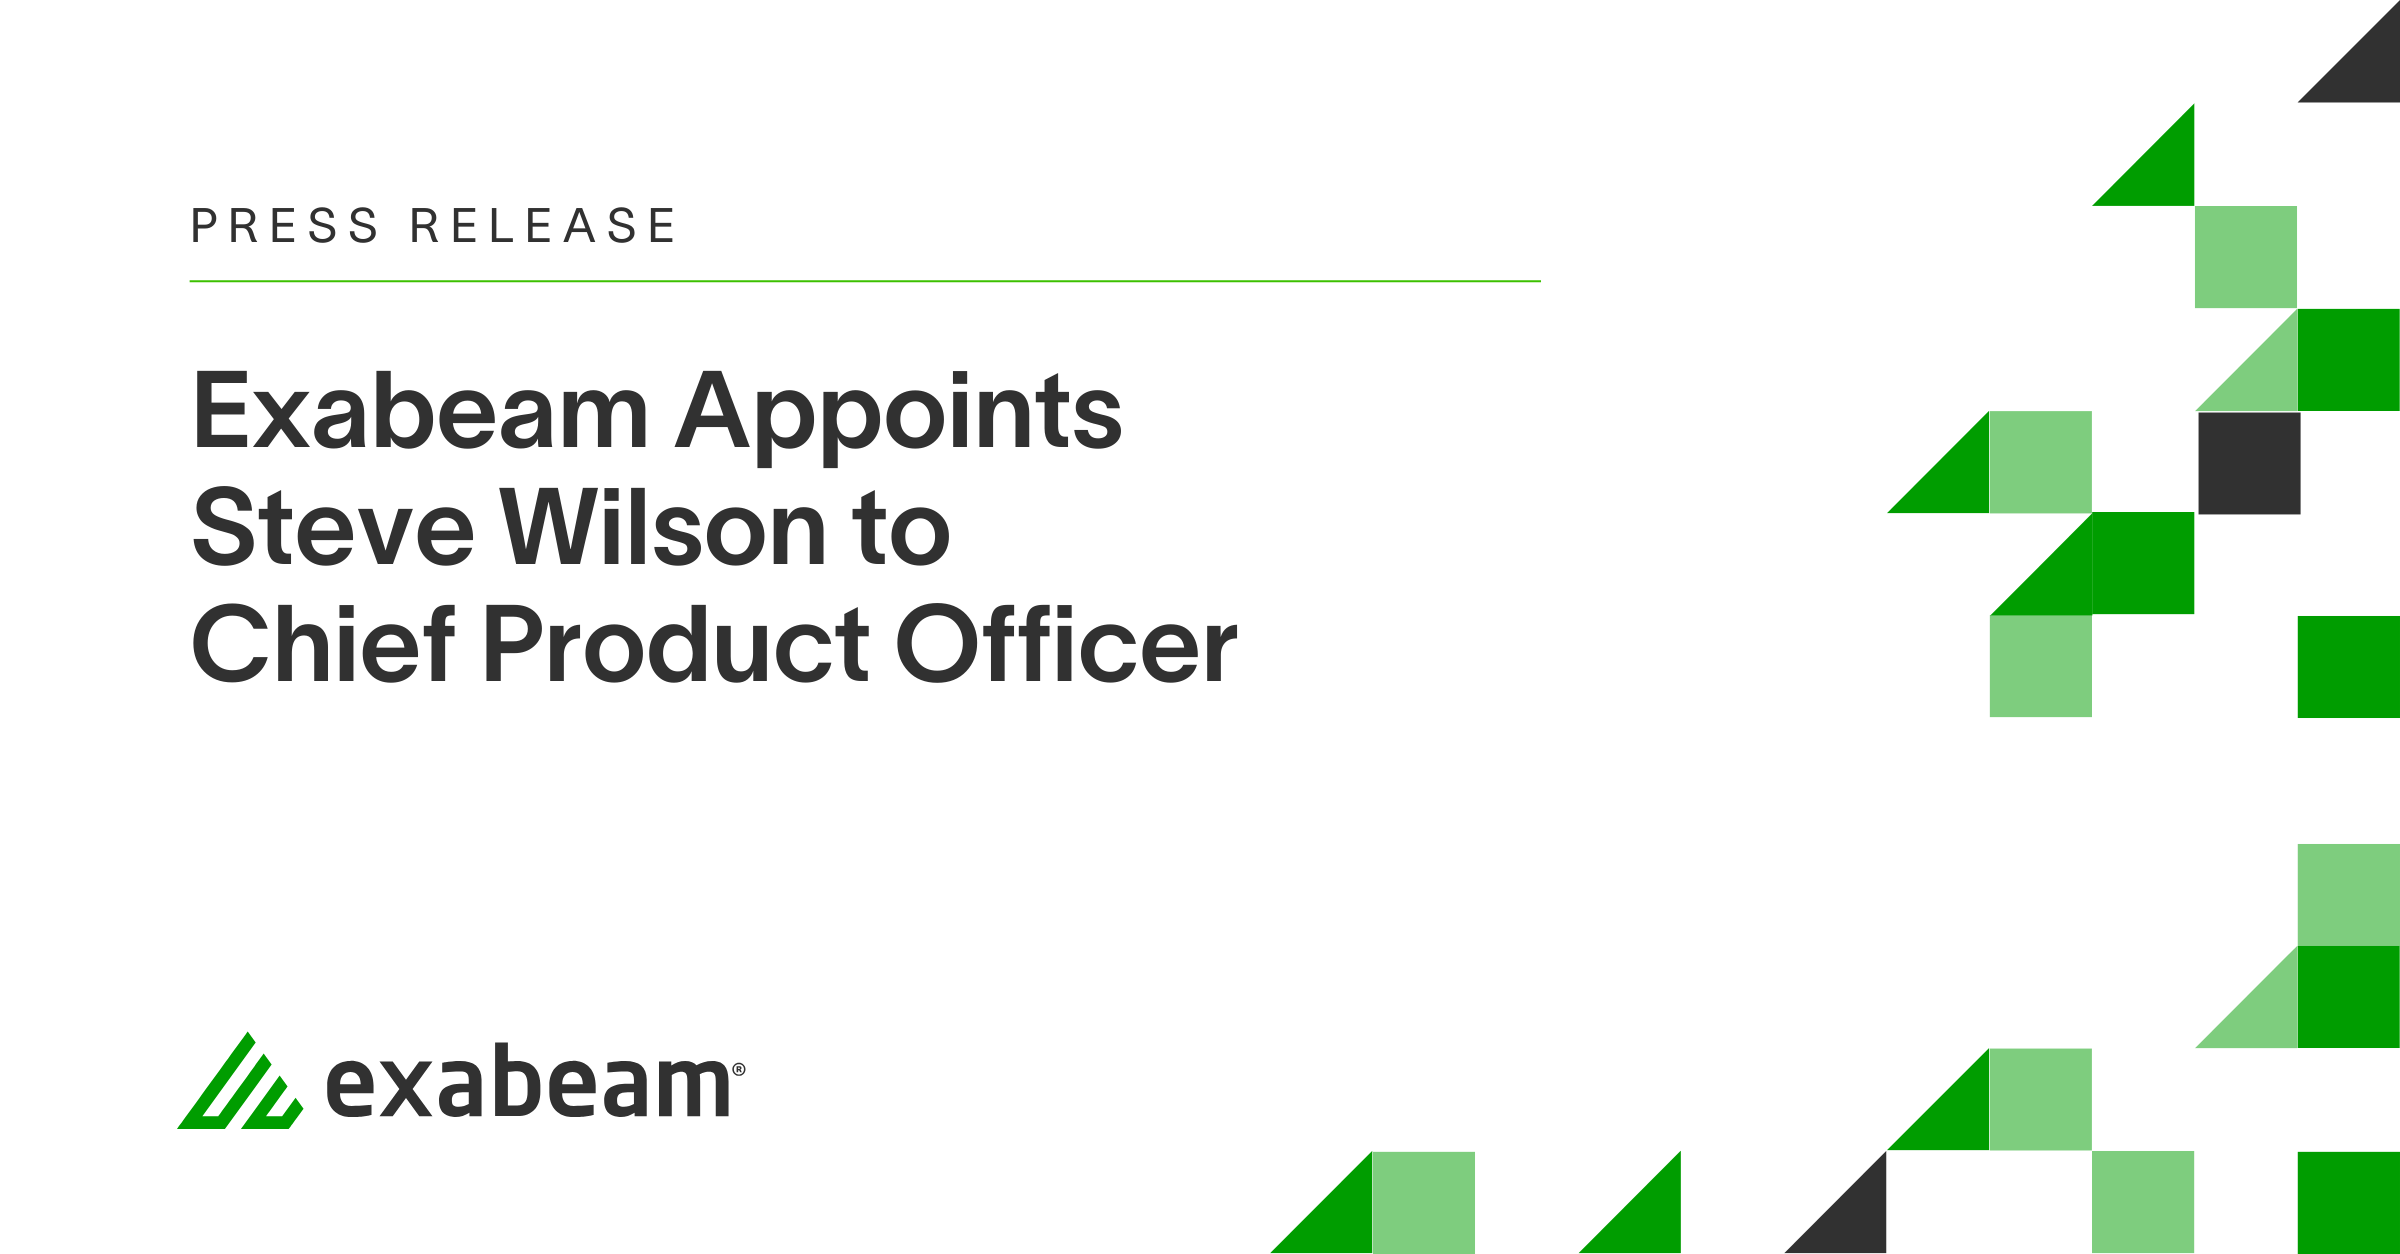 Exabeam Appoints Steve Wilson to Chief Product Officer